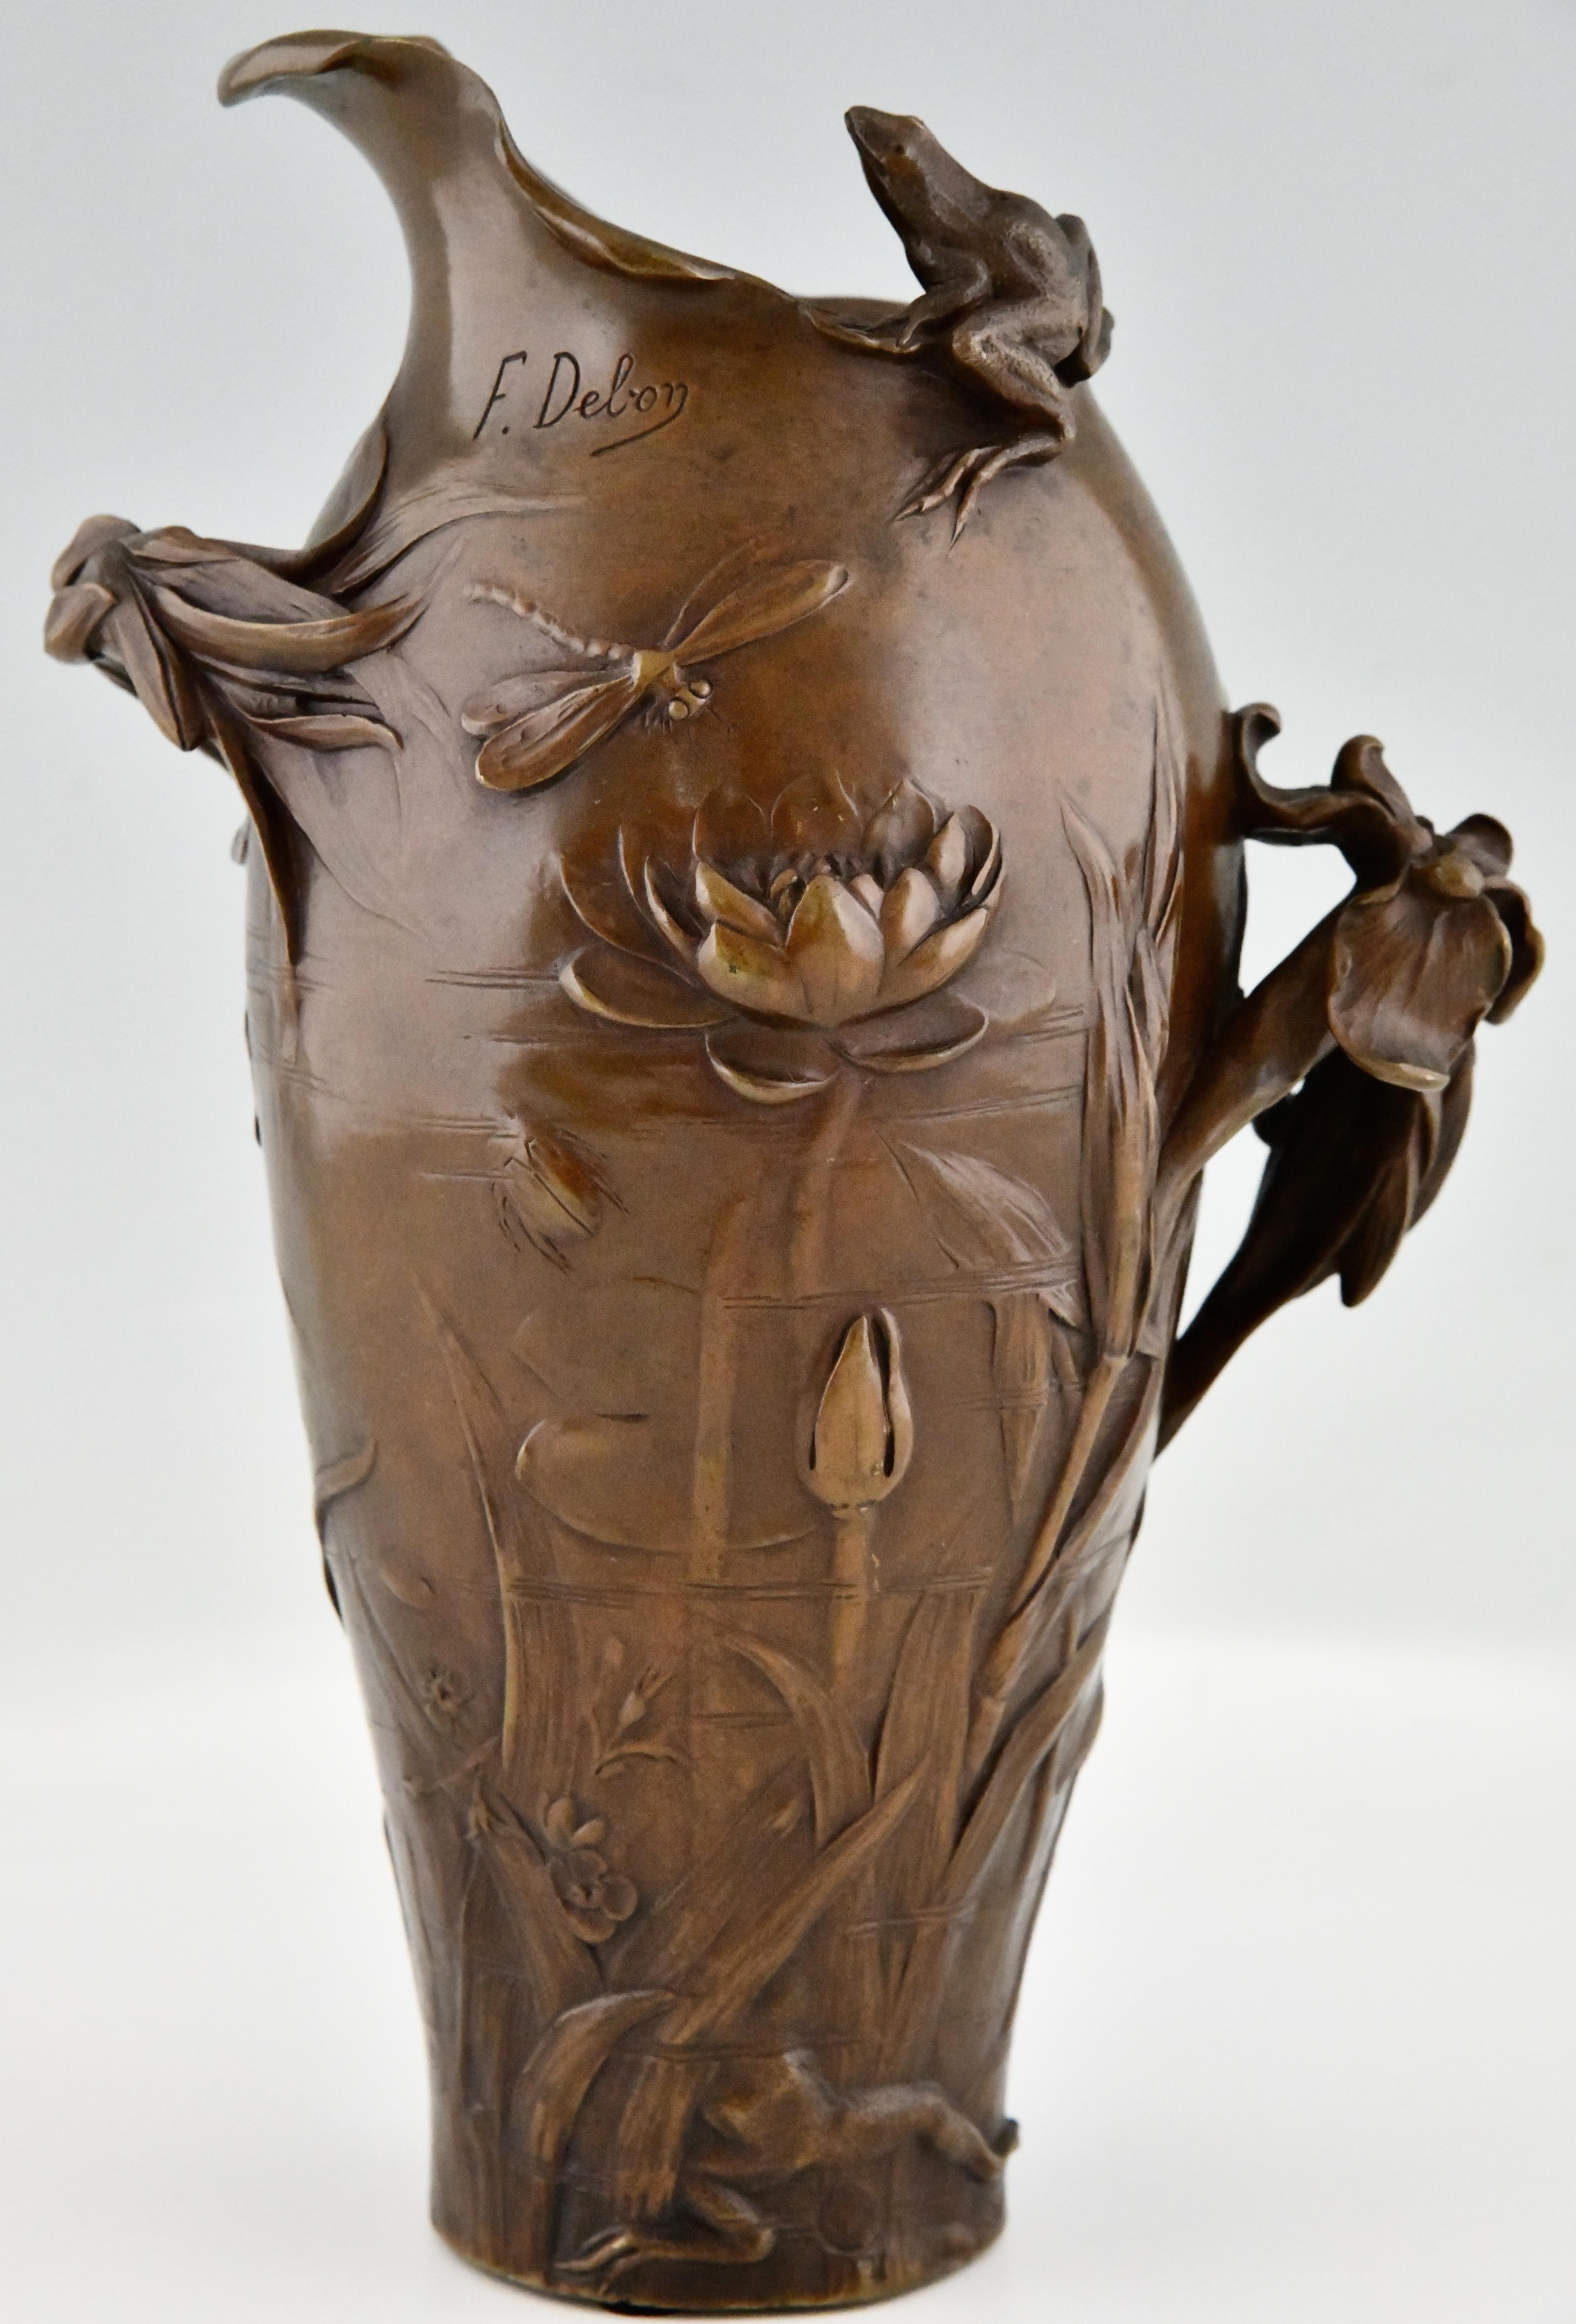 Art Nouveau bronze vase with frogs, dragonfly, water lily and iris. 
This model is called The Pond and signed by Frédéric Debon. 
France 1902. 
With Susse Frères foundry stamp and signature.
This model was exhibited at:
The salon de la Société